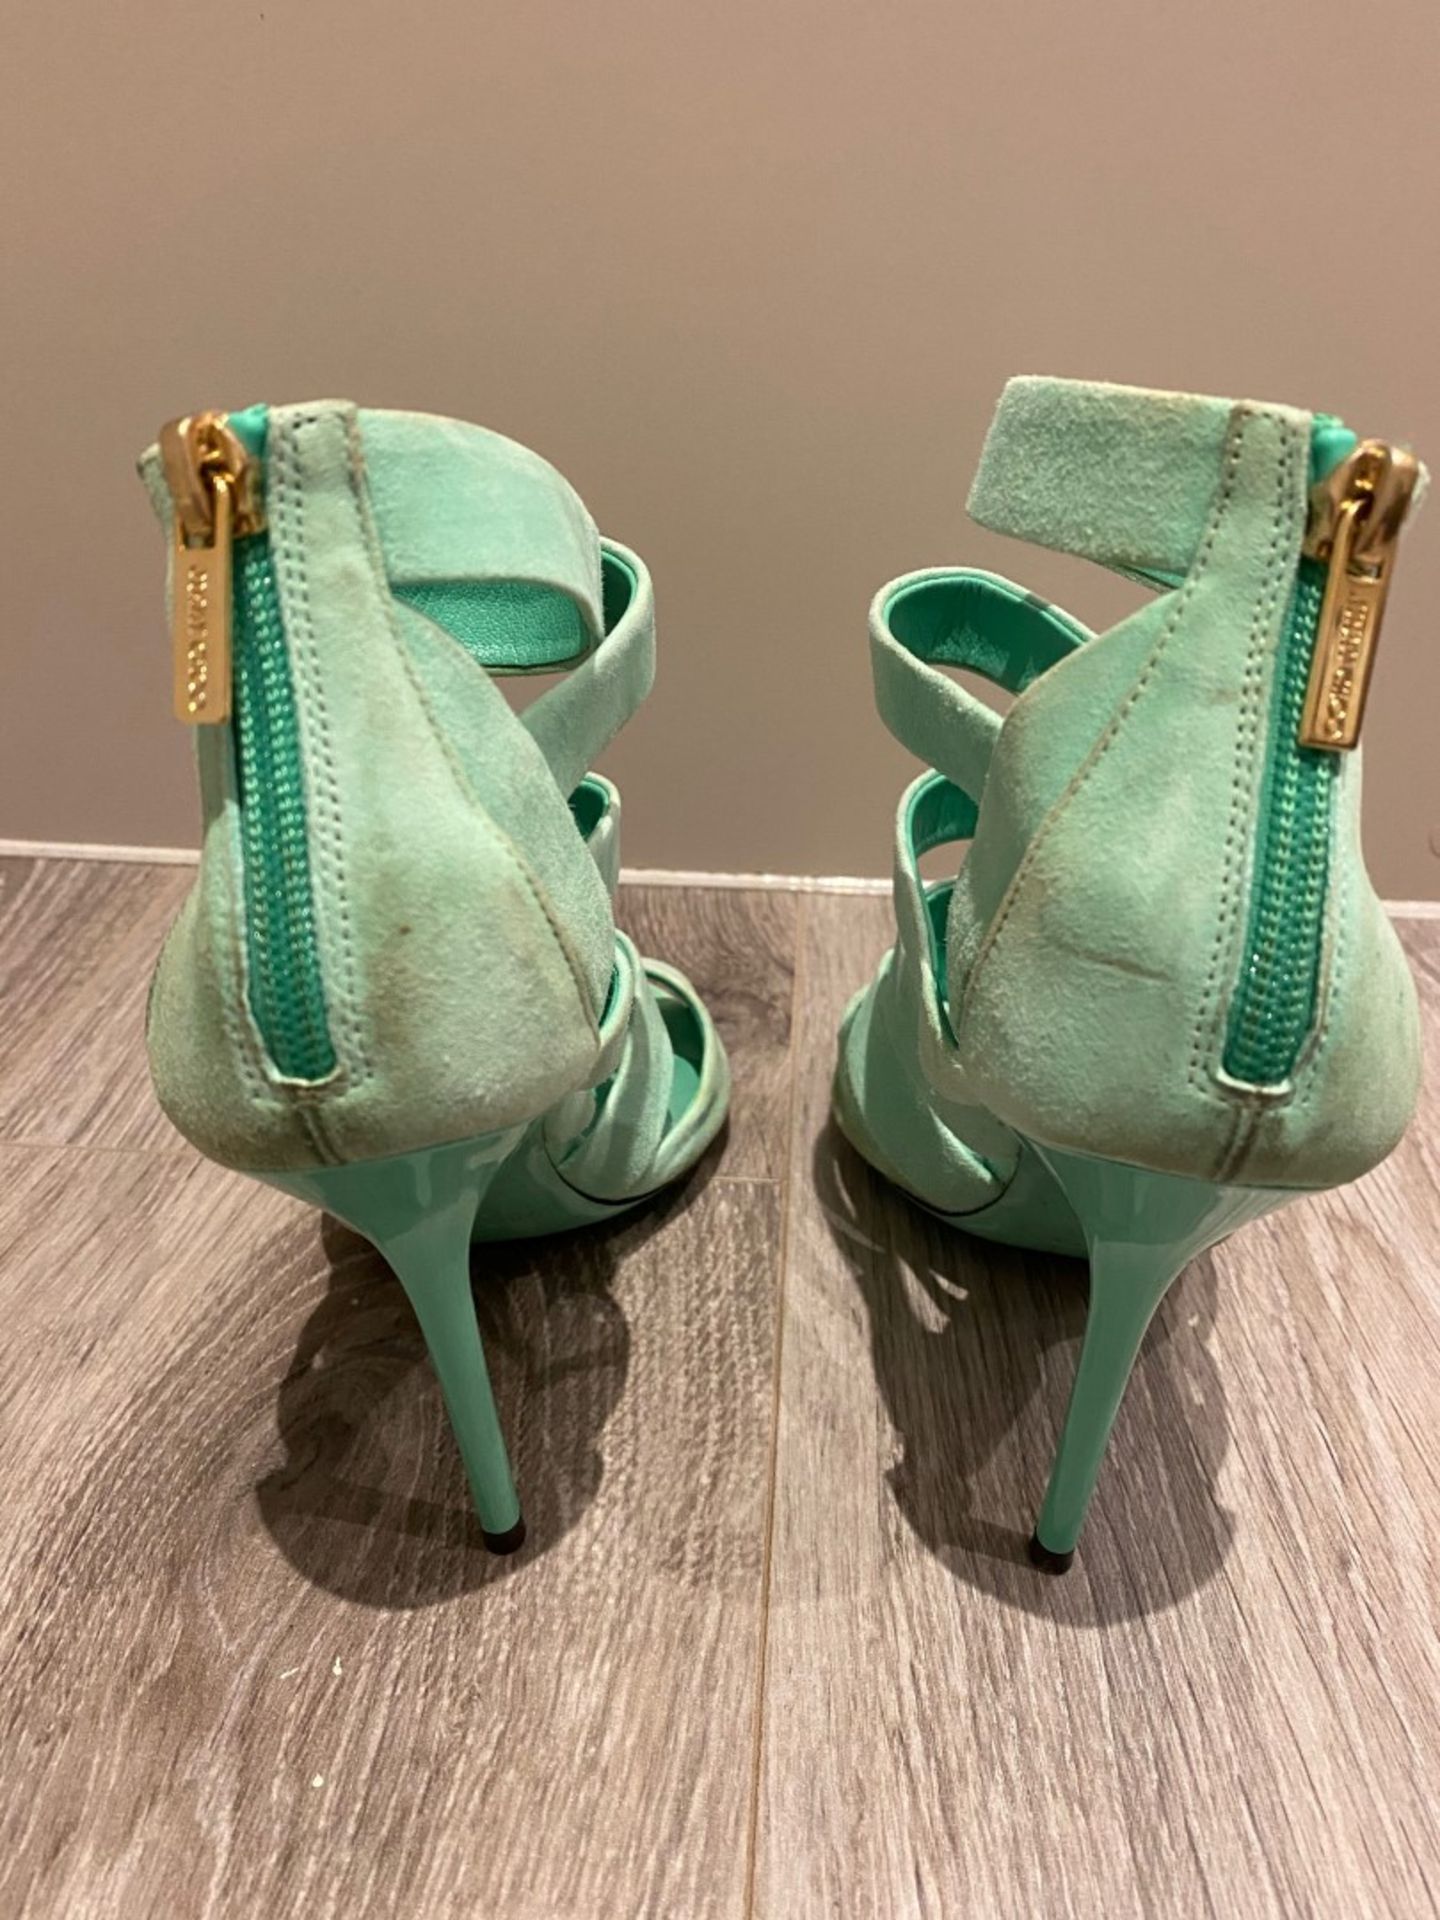 1 x Pair Of Genuine Jimmy Choo High Heel Shoes In Mint Green - Size: 36 - Preowned in Worn Condition - Image 4 of 6